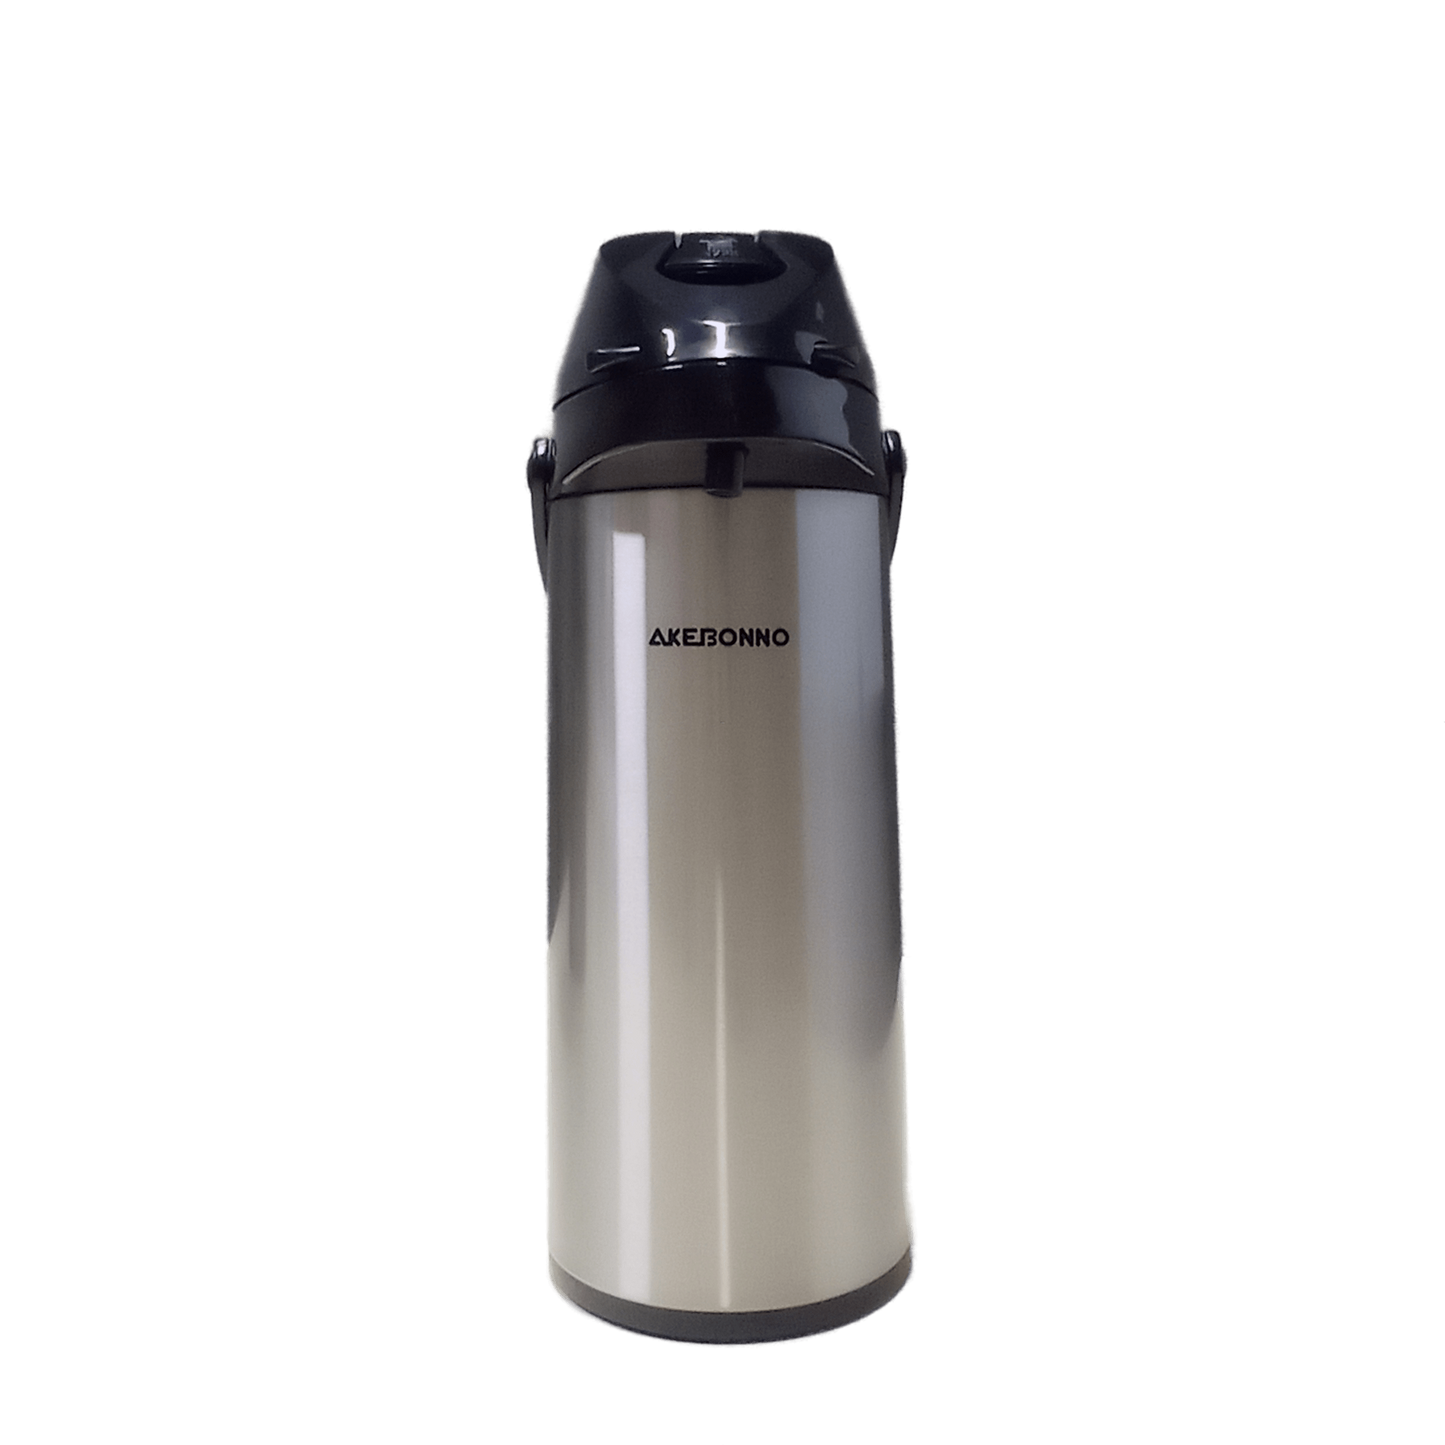 AKEBONNO VACUUM FLASK / THERMOS AIRPOT HXB SERIES